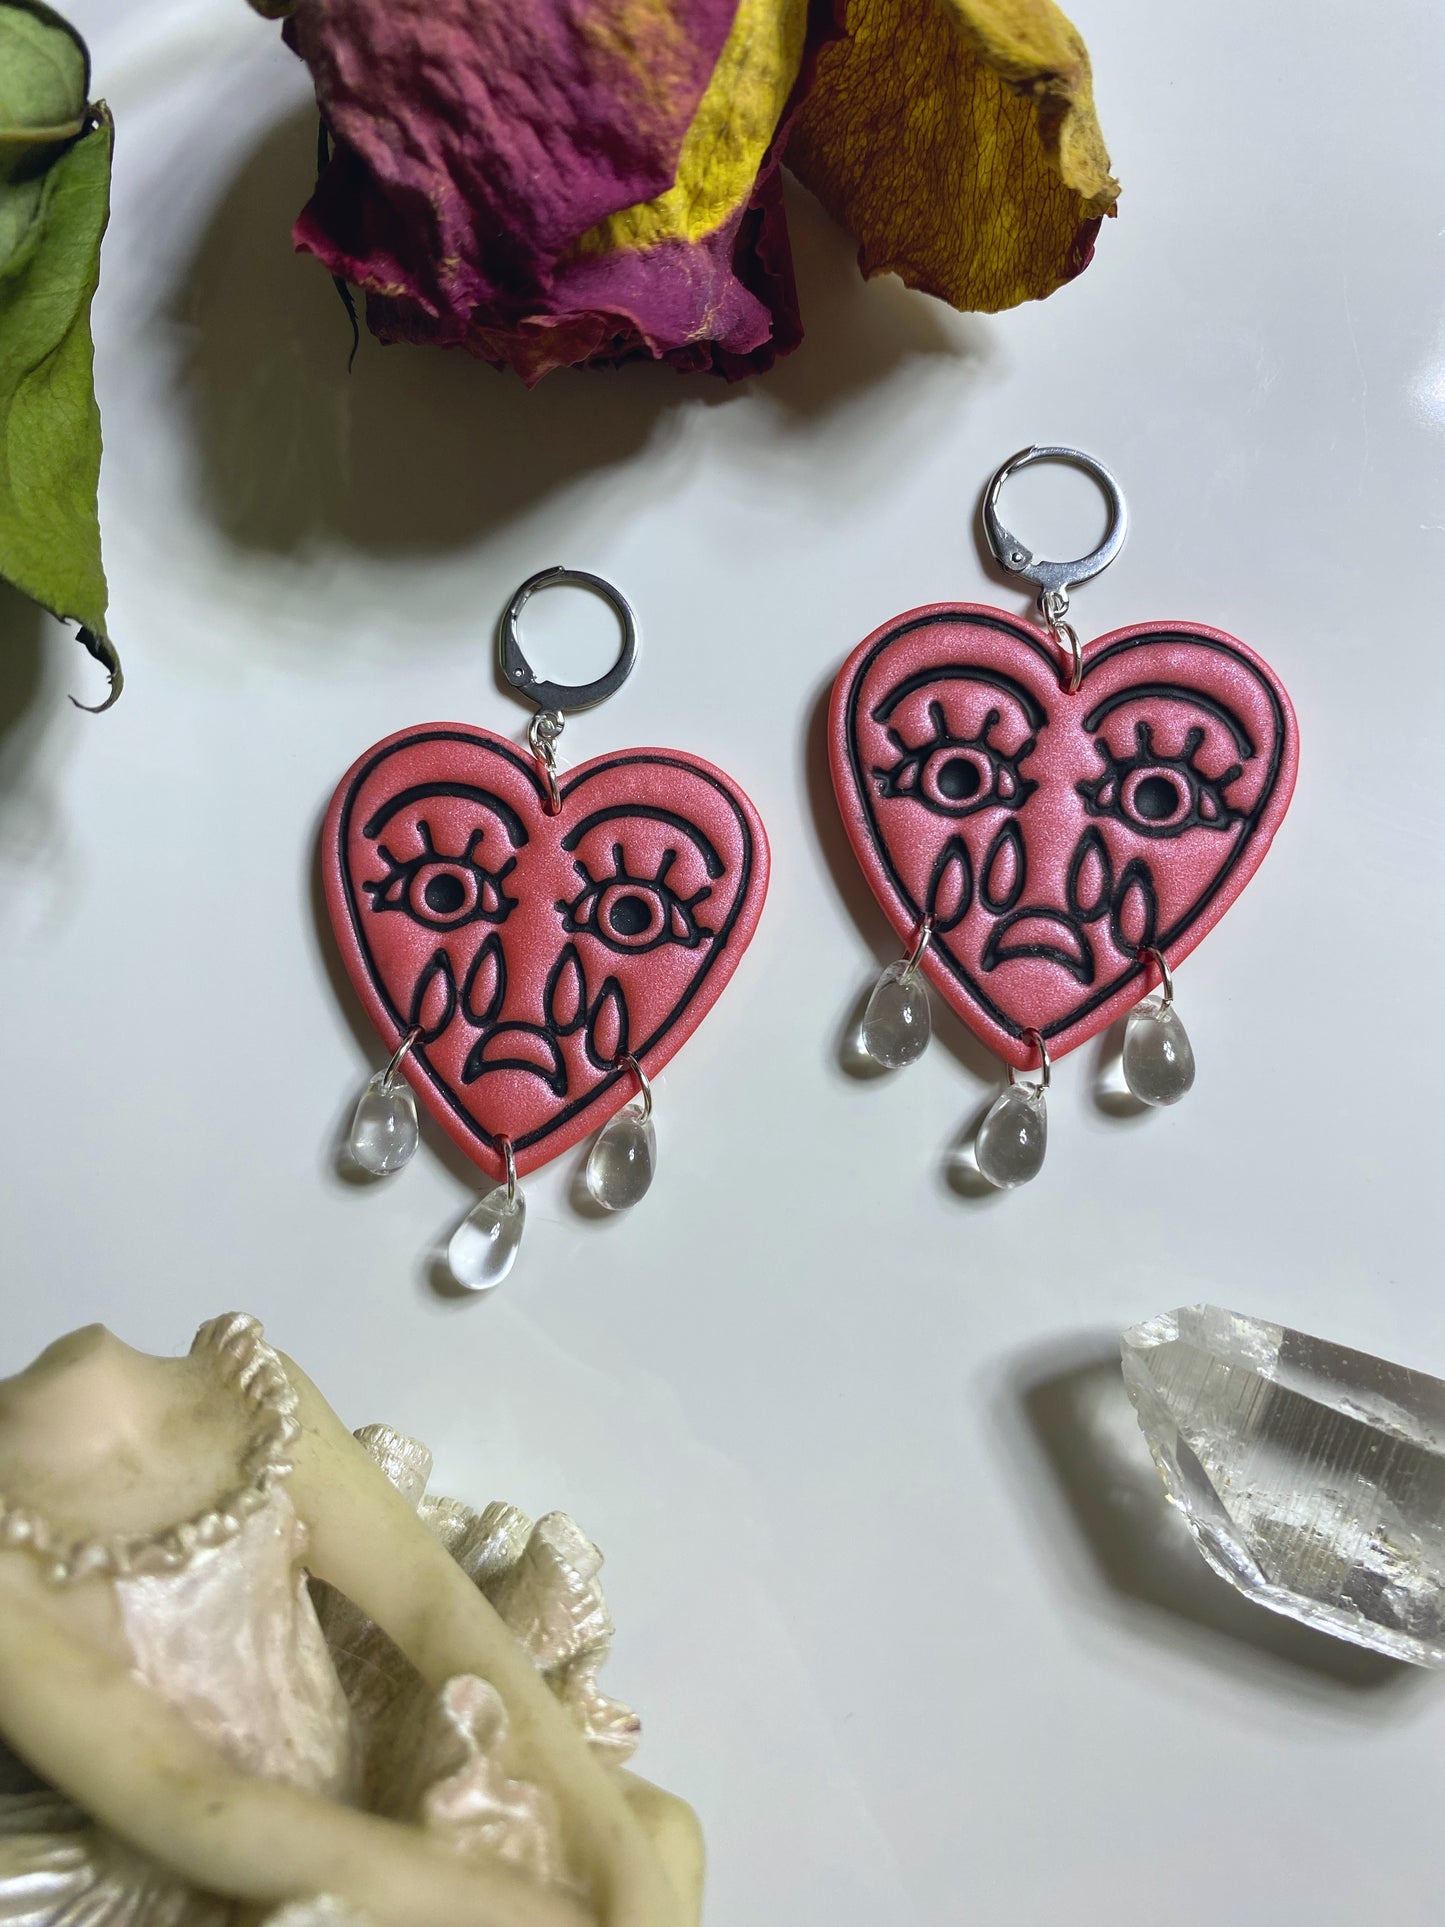 Pink Crying Heart Earrings